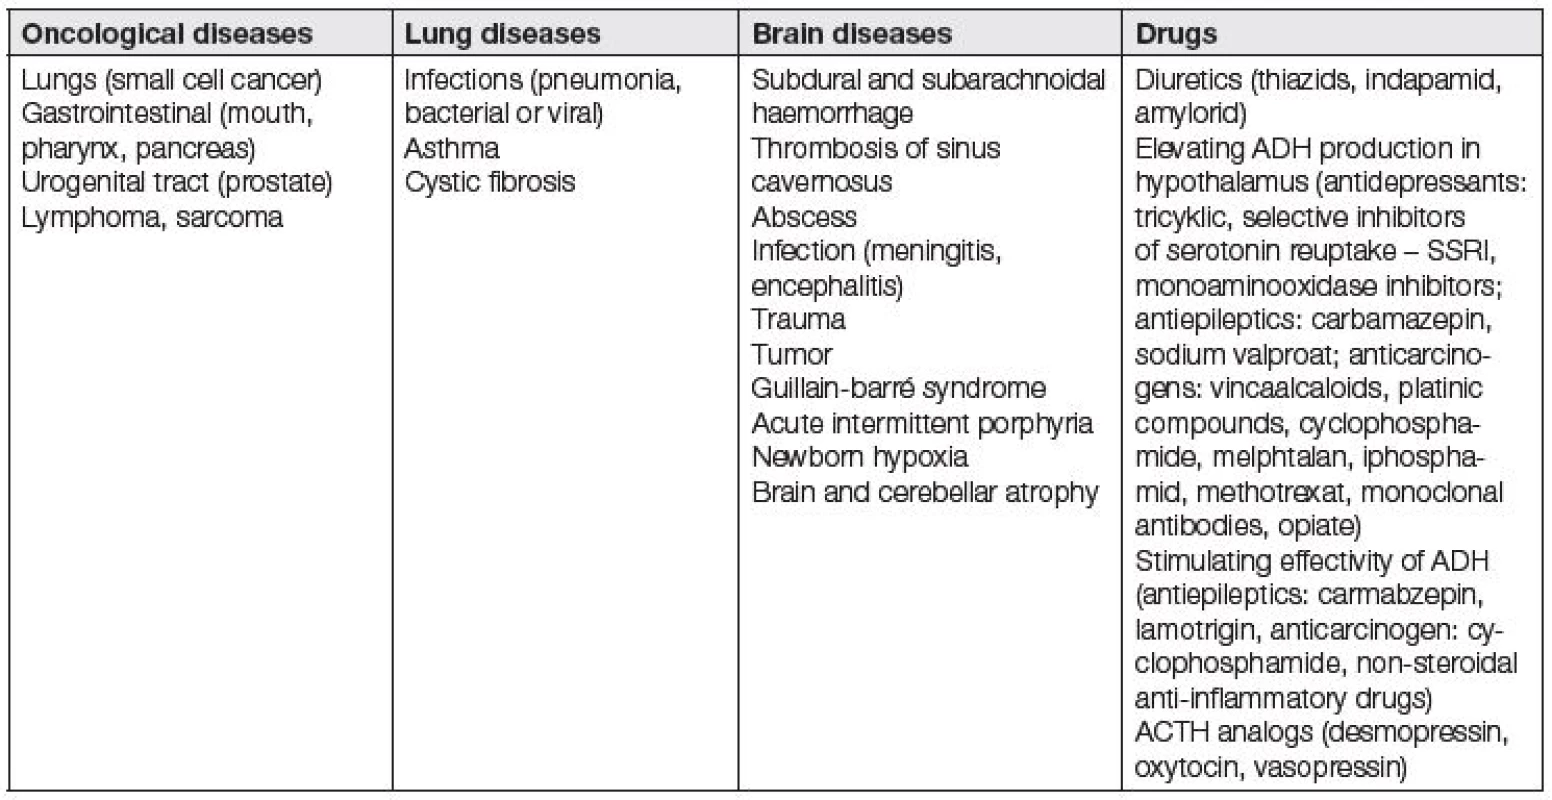 Causes of the syndrome of inappropriate antidiuretic hormone secretion (SIADH) [5, 8, 30]